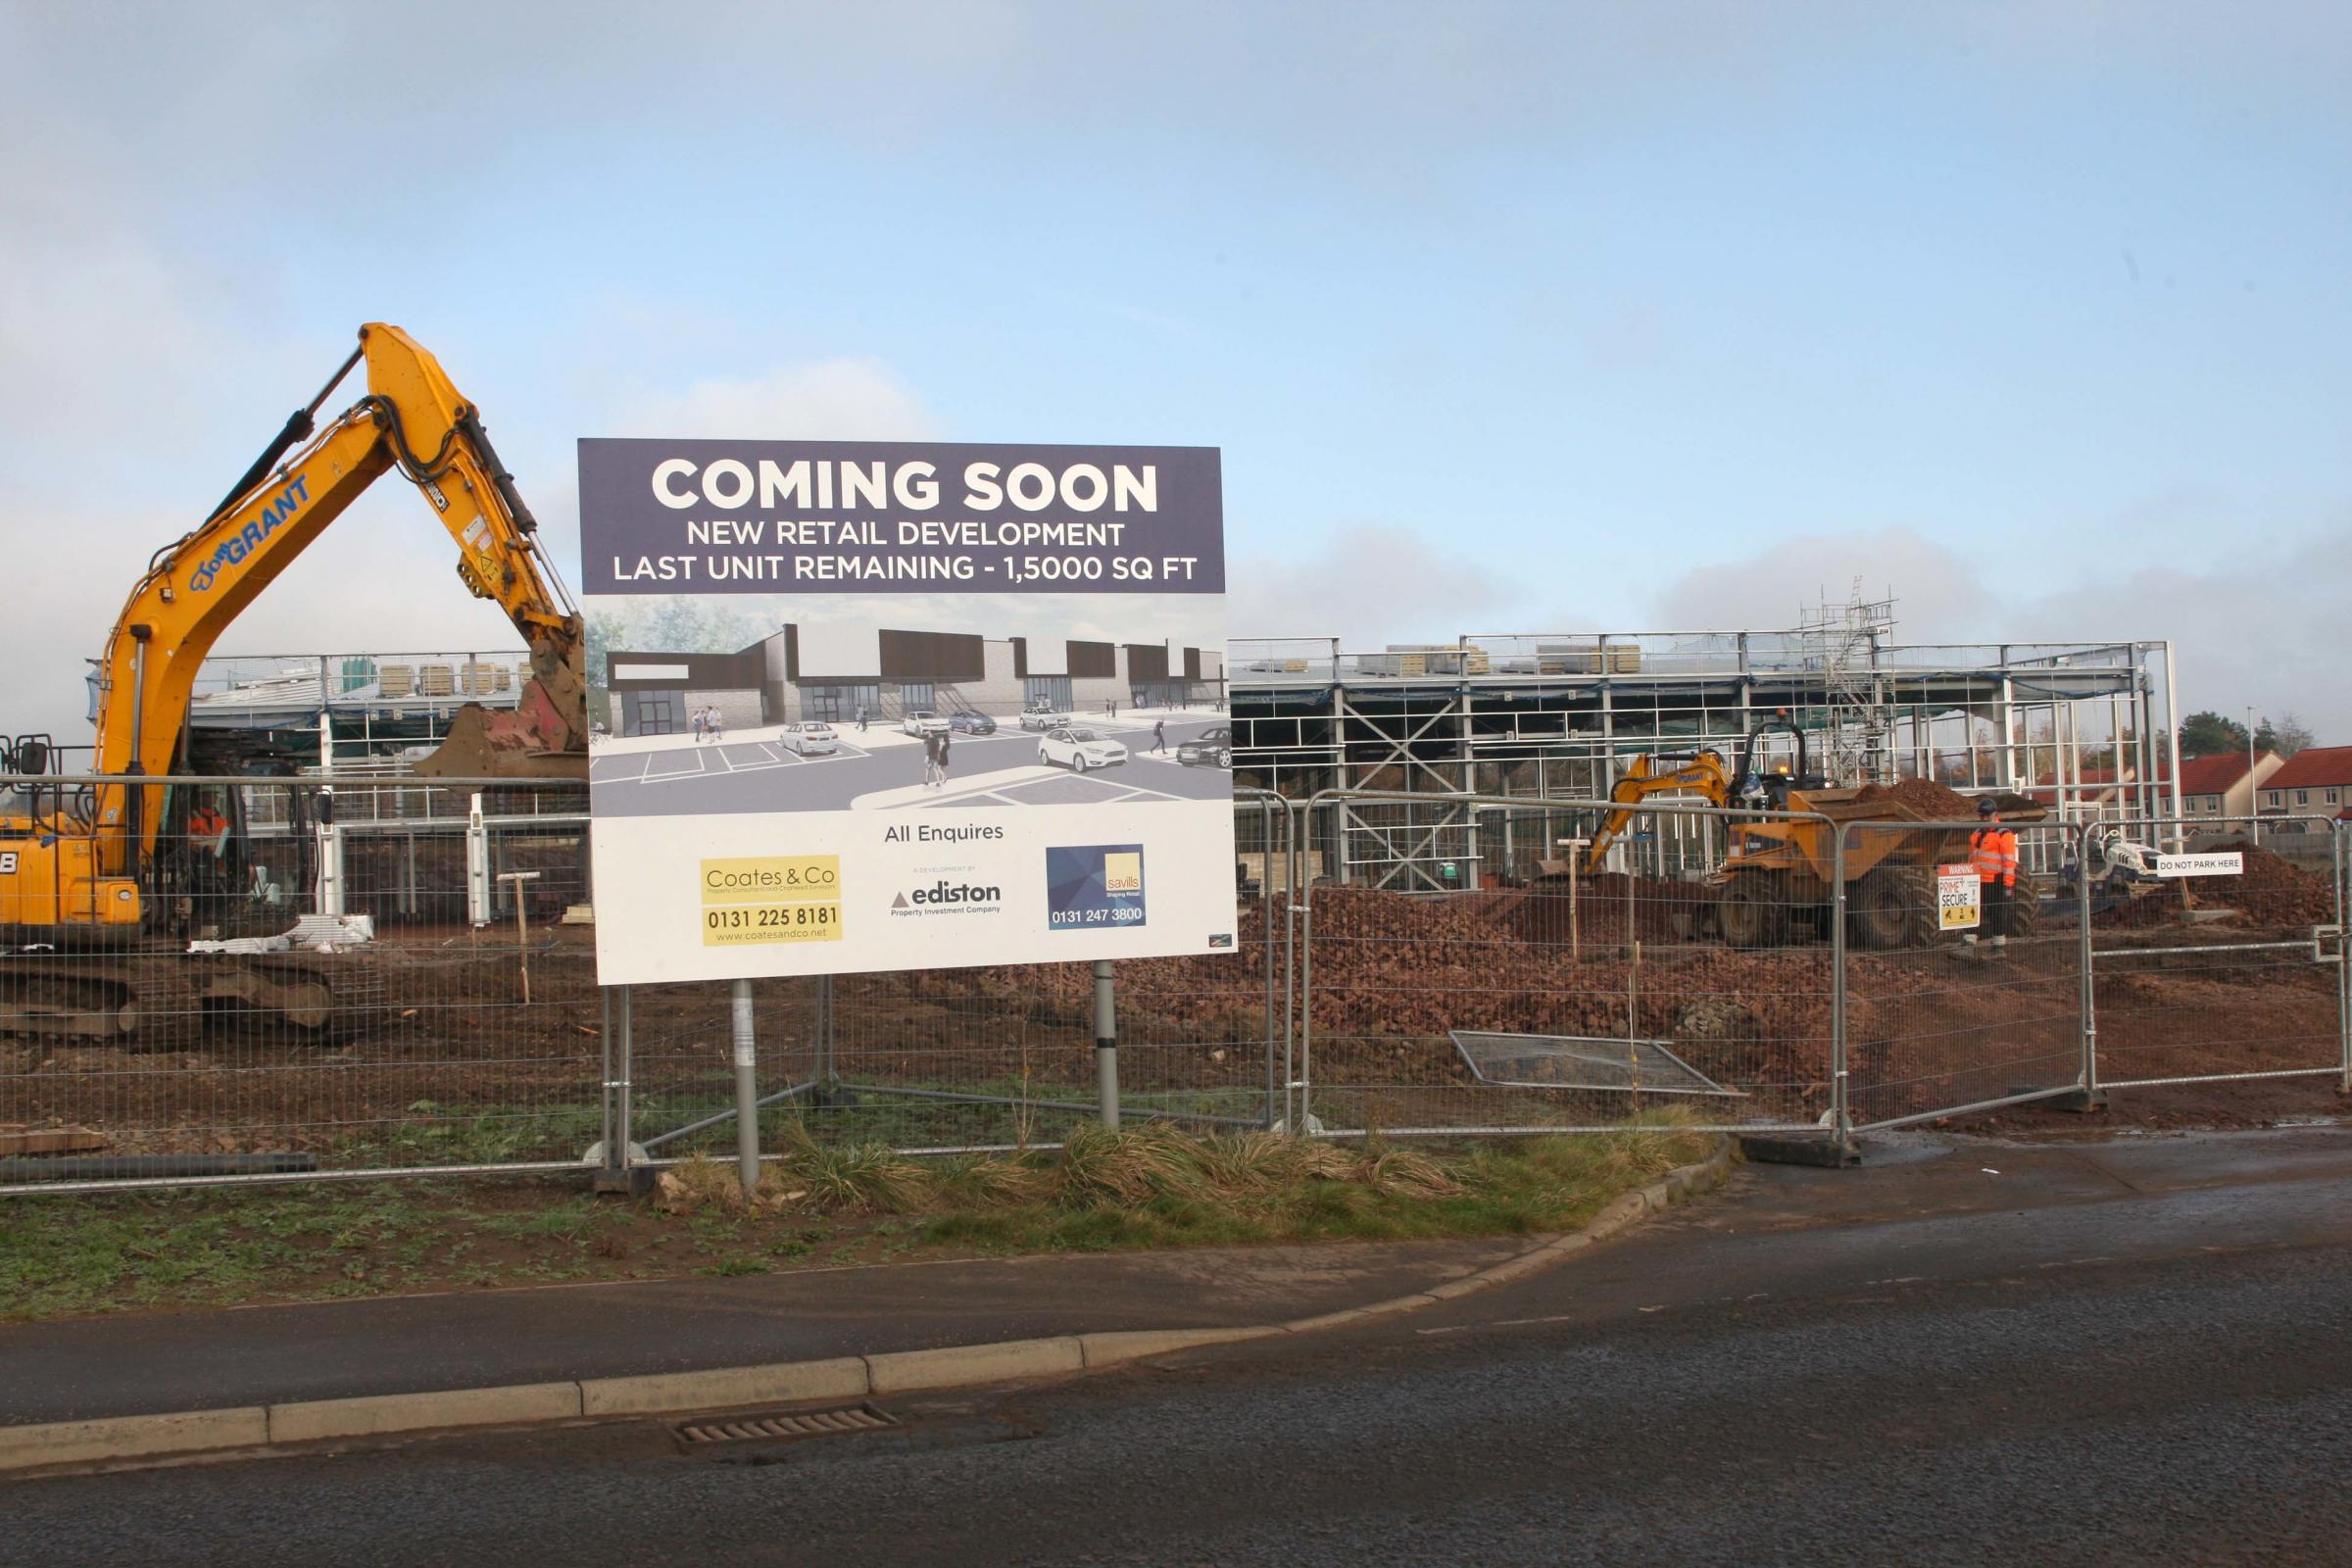 Aldi will be moving to Gateside Retail Park later this year